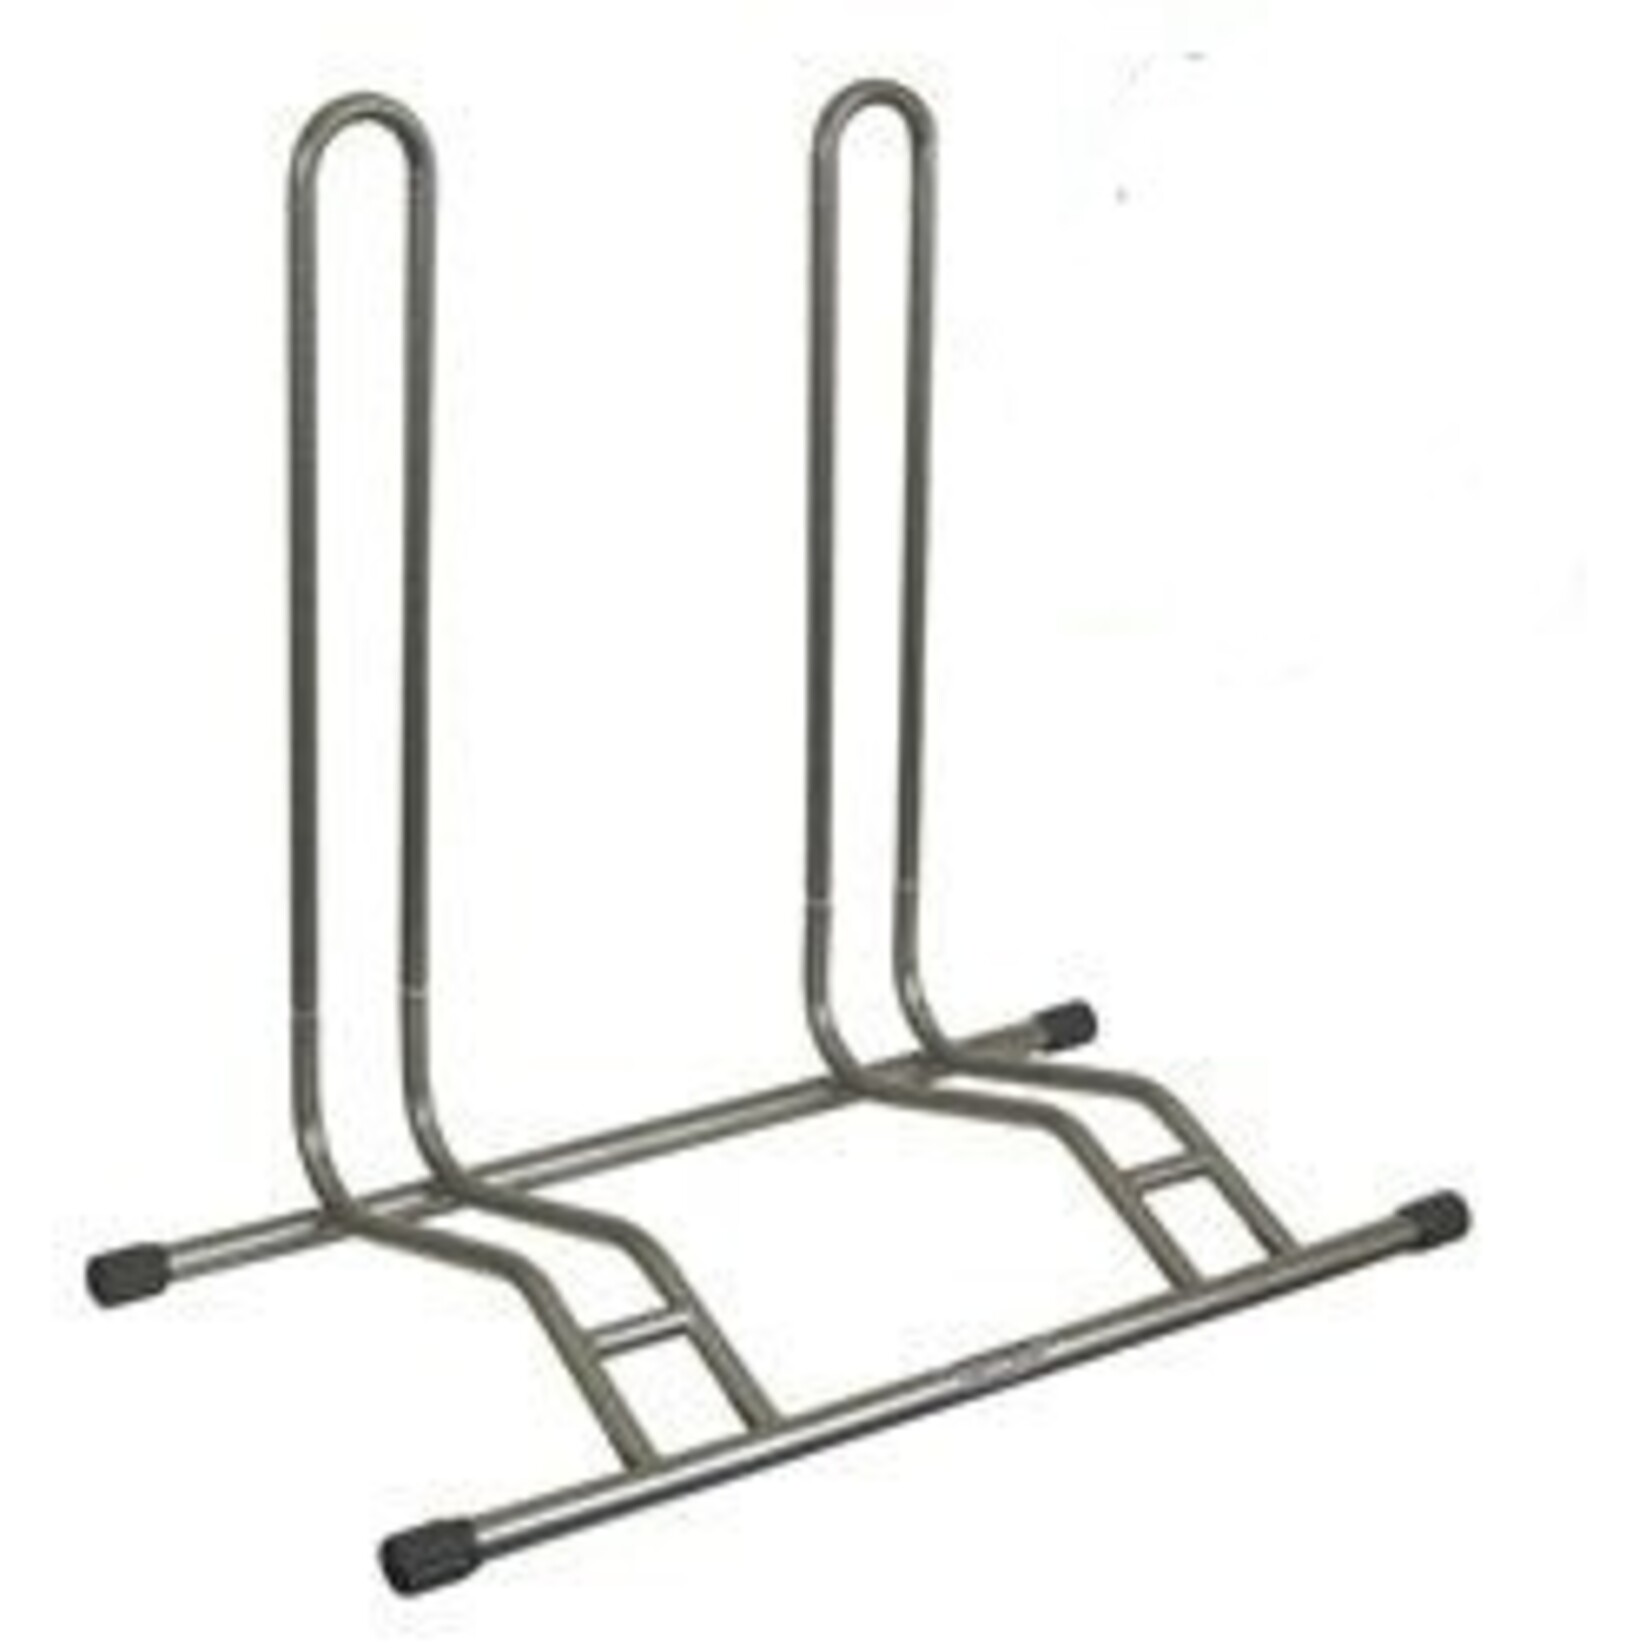 Superstand Superstand 2 Bike Storage Stand - Suits Up to 29er Wheels & 2.5" Wide Tyres